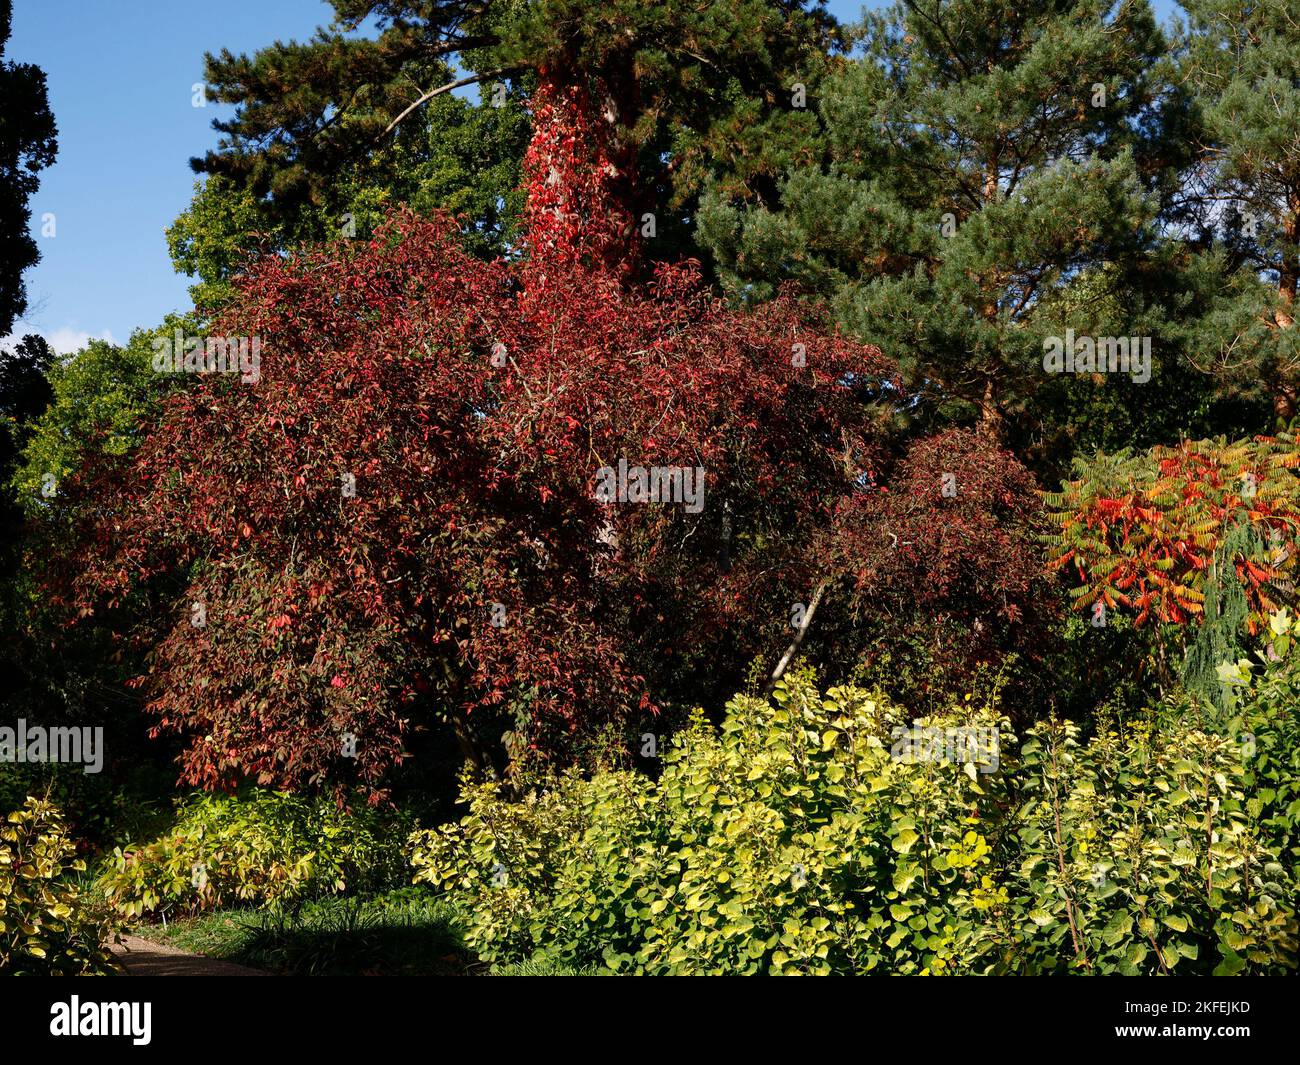 Euonymus europaeus red cascade seen as a small tree in the garden with red autumn leaves. Stock Photo